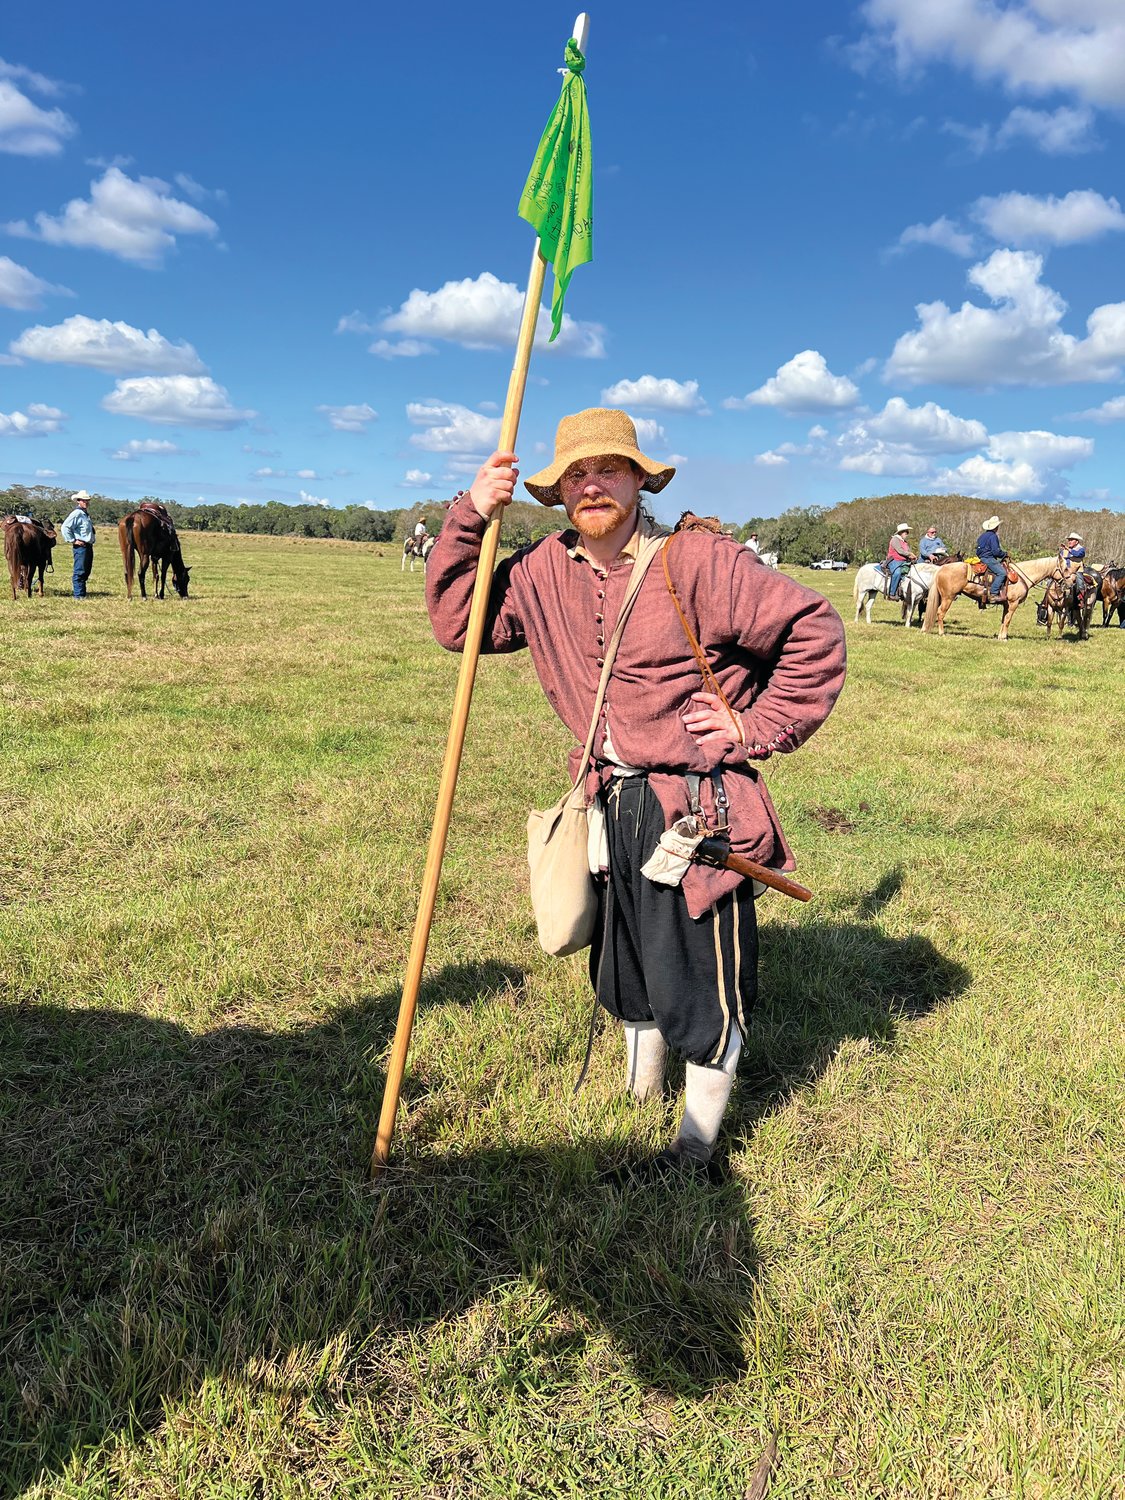 Bennett Lloyd dressed in clothing appropriate for Spanish explorers of the 1530s while hiking behind the Great Florida Cattle Drive, Dec. 4-10 in Osceola County,